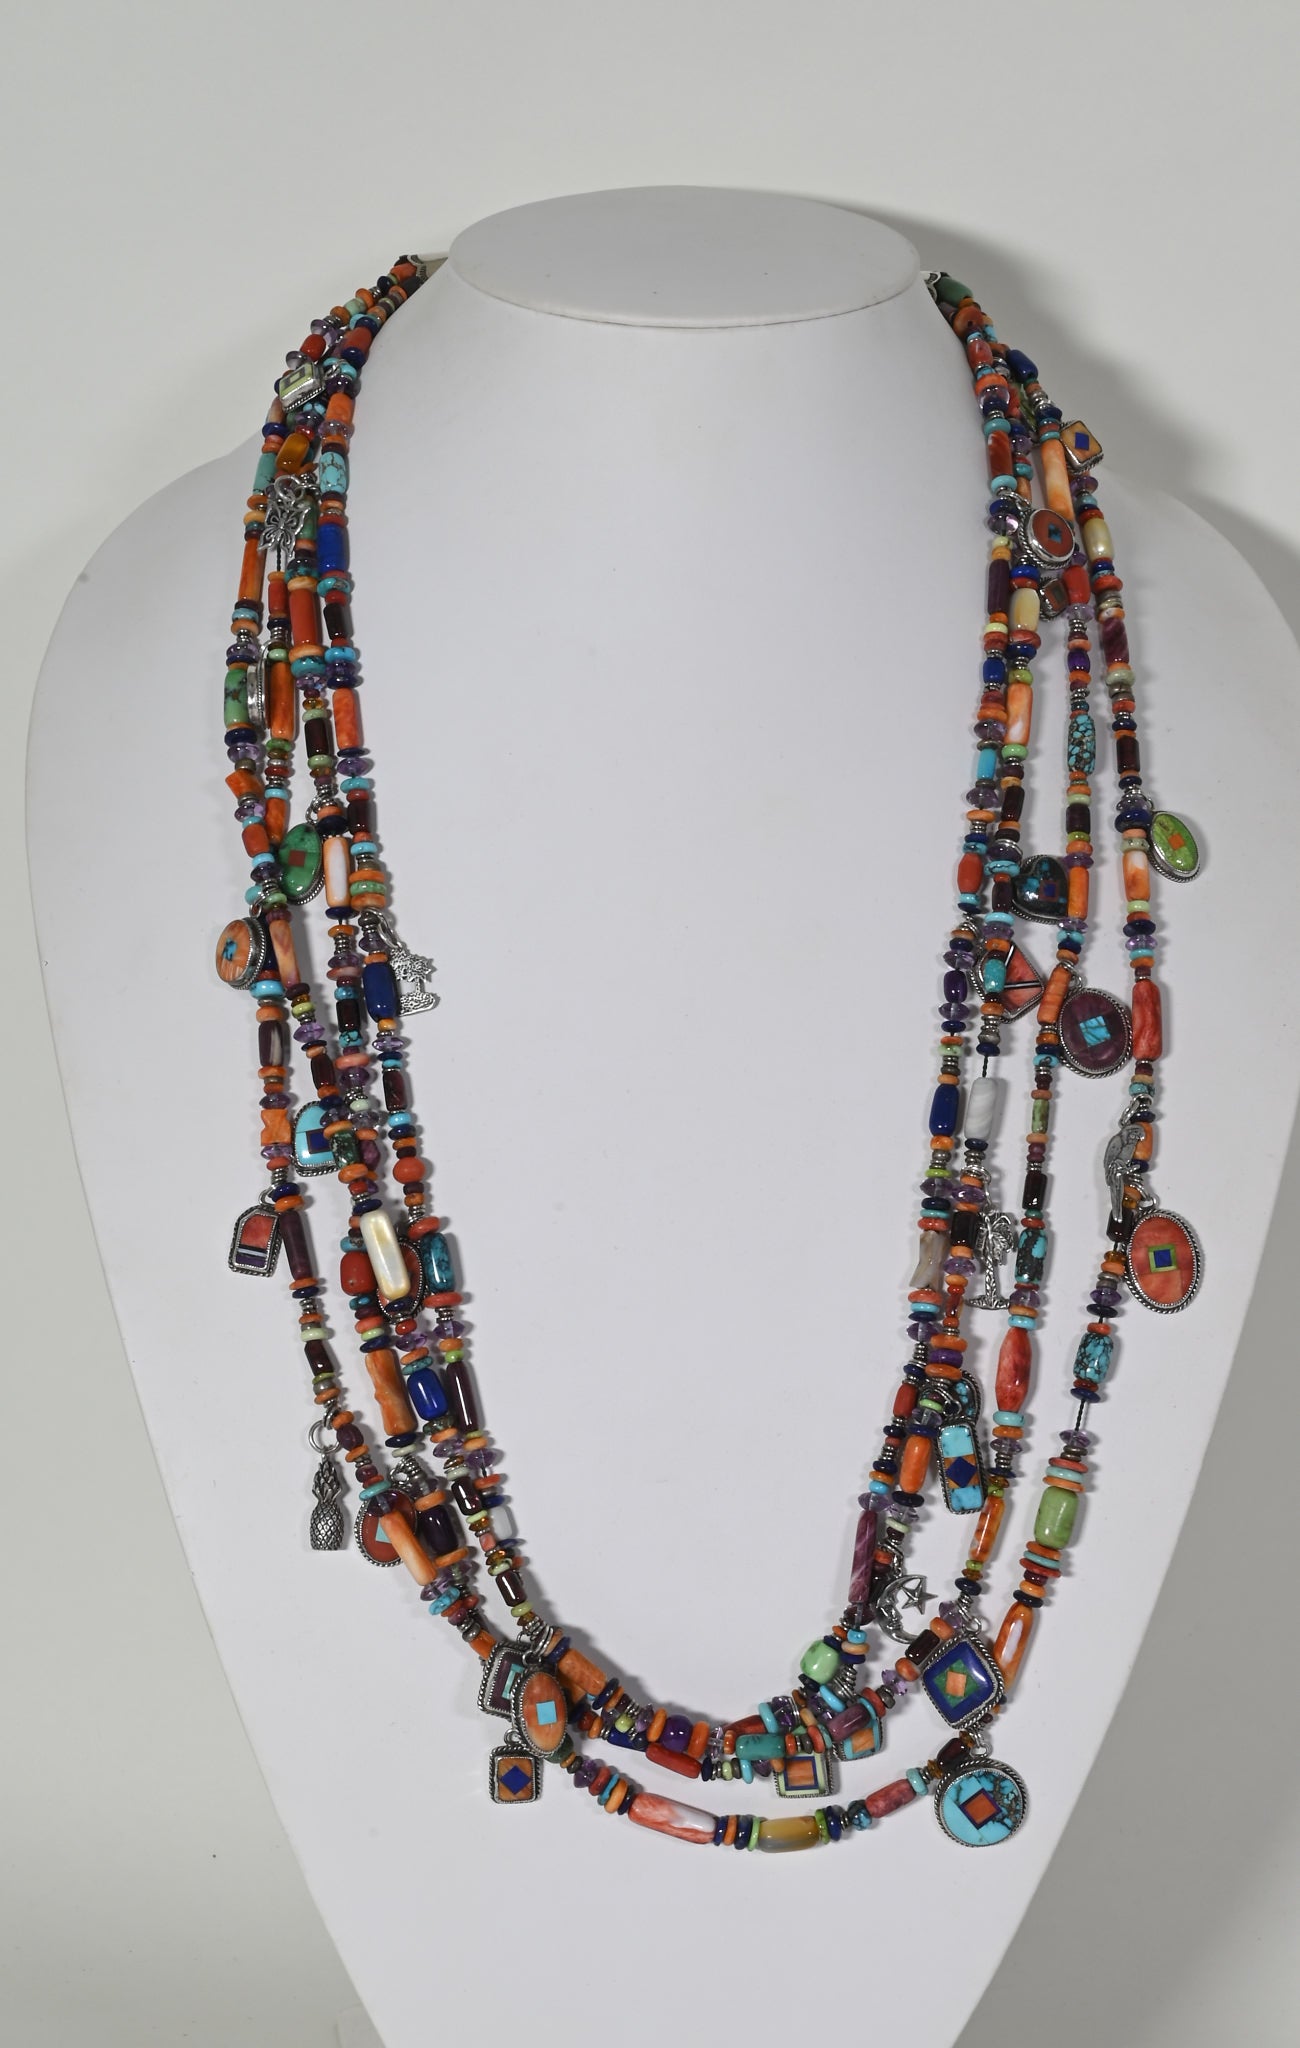 Multi-stone Necklace with Inlaid Amulets by Bennie & Valerie Aldrich (non-native)